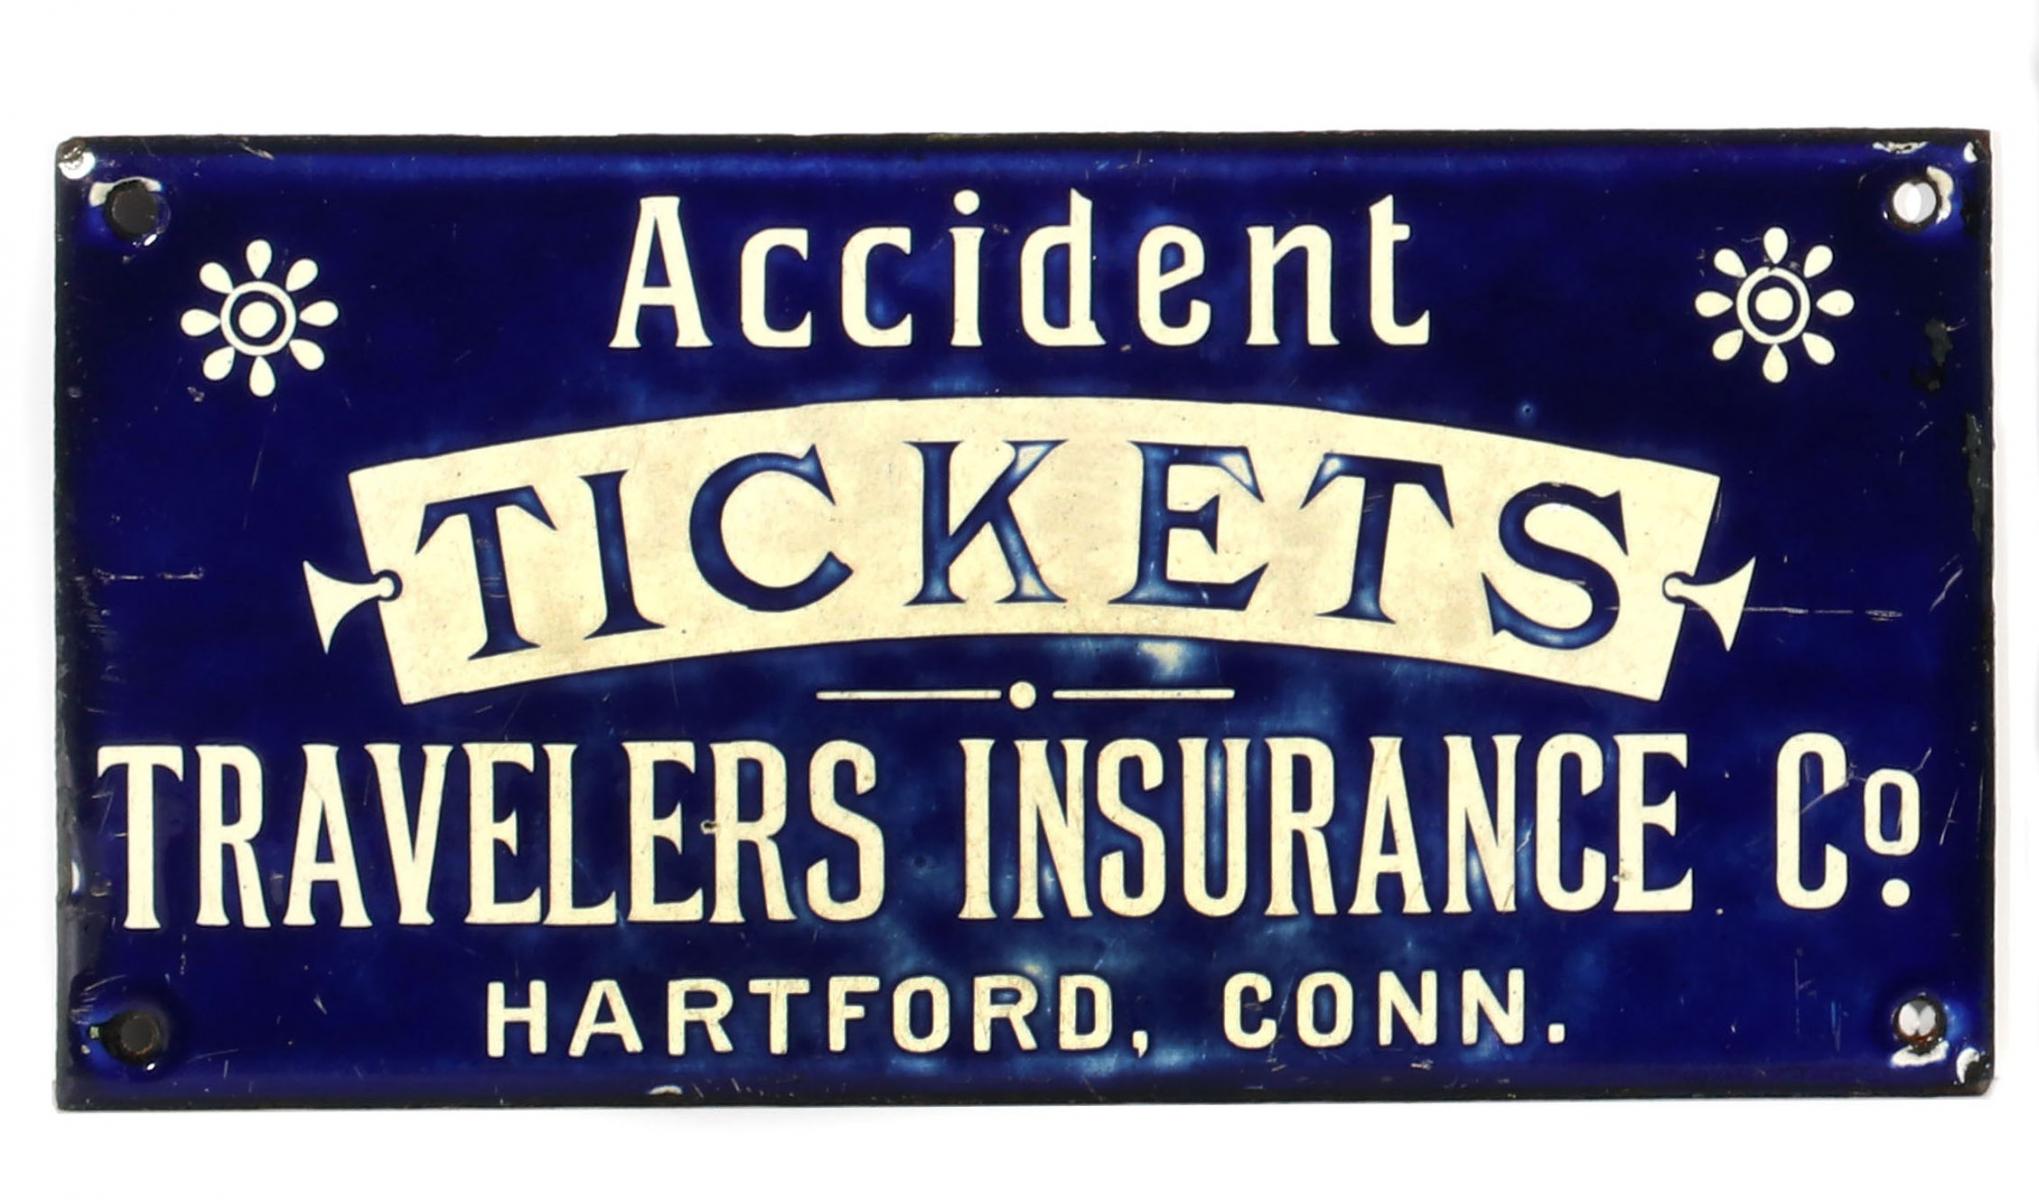 TRAVELERS INSURANCE ACCIDENT TICKETS PORCELAIN SIGN